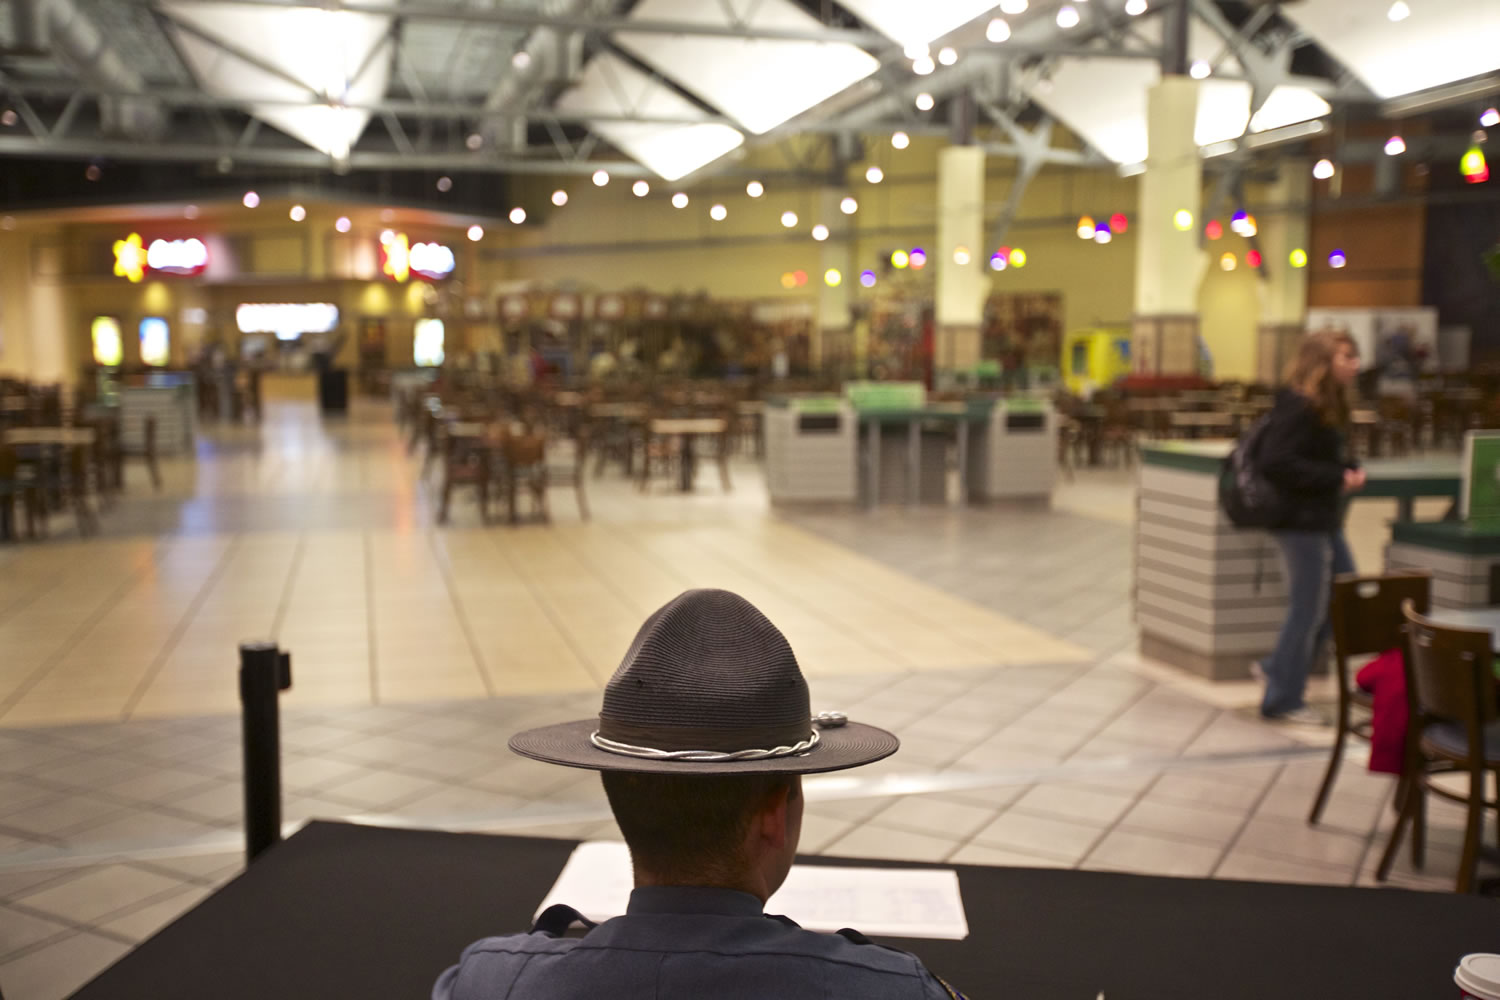 A security guard looks over the food court at the Clackamas Town Center mall as it opens, on Friday, Dec 14, 2012 in Portland, Ore. The mall is reopening, three days after a gunman killed two people and wounded a third amid a holiday shopping crowd estimated at 10,000. The shooter, Jacob Tyler Roberts, killed himself after the attack Tuesday afternoon.